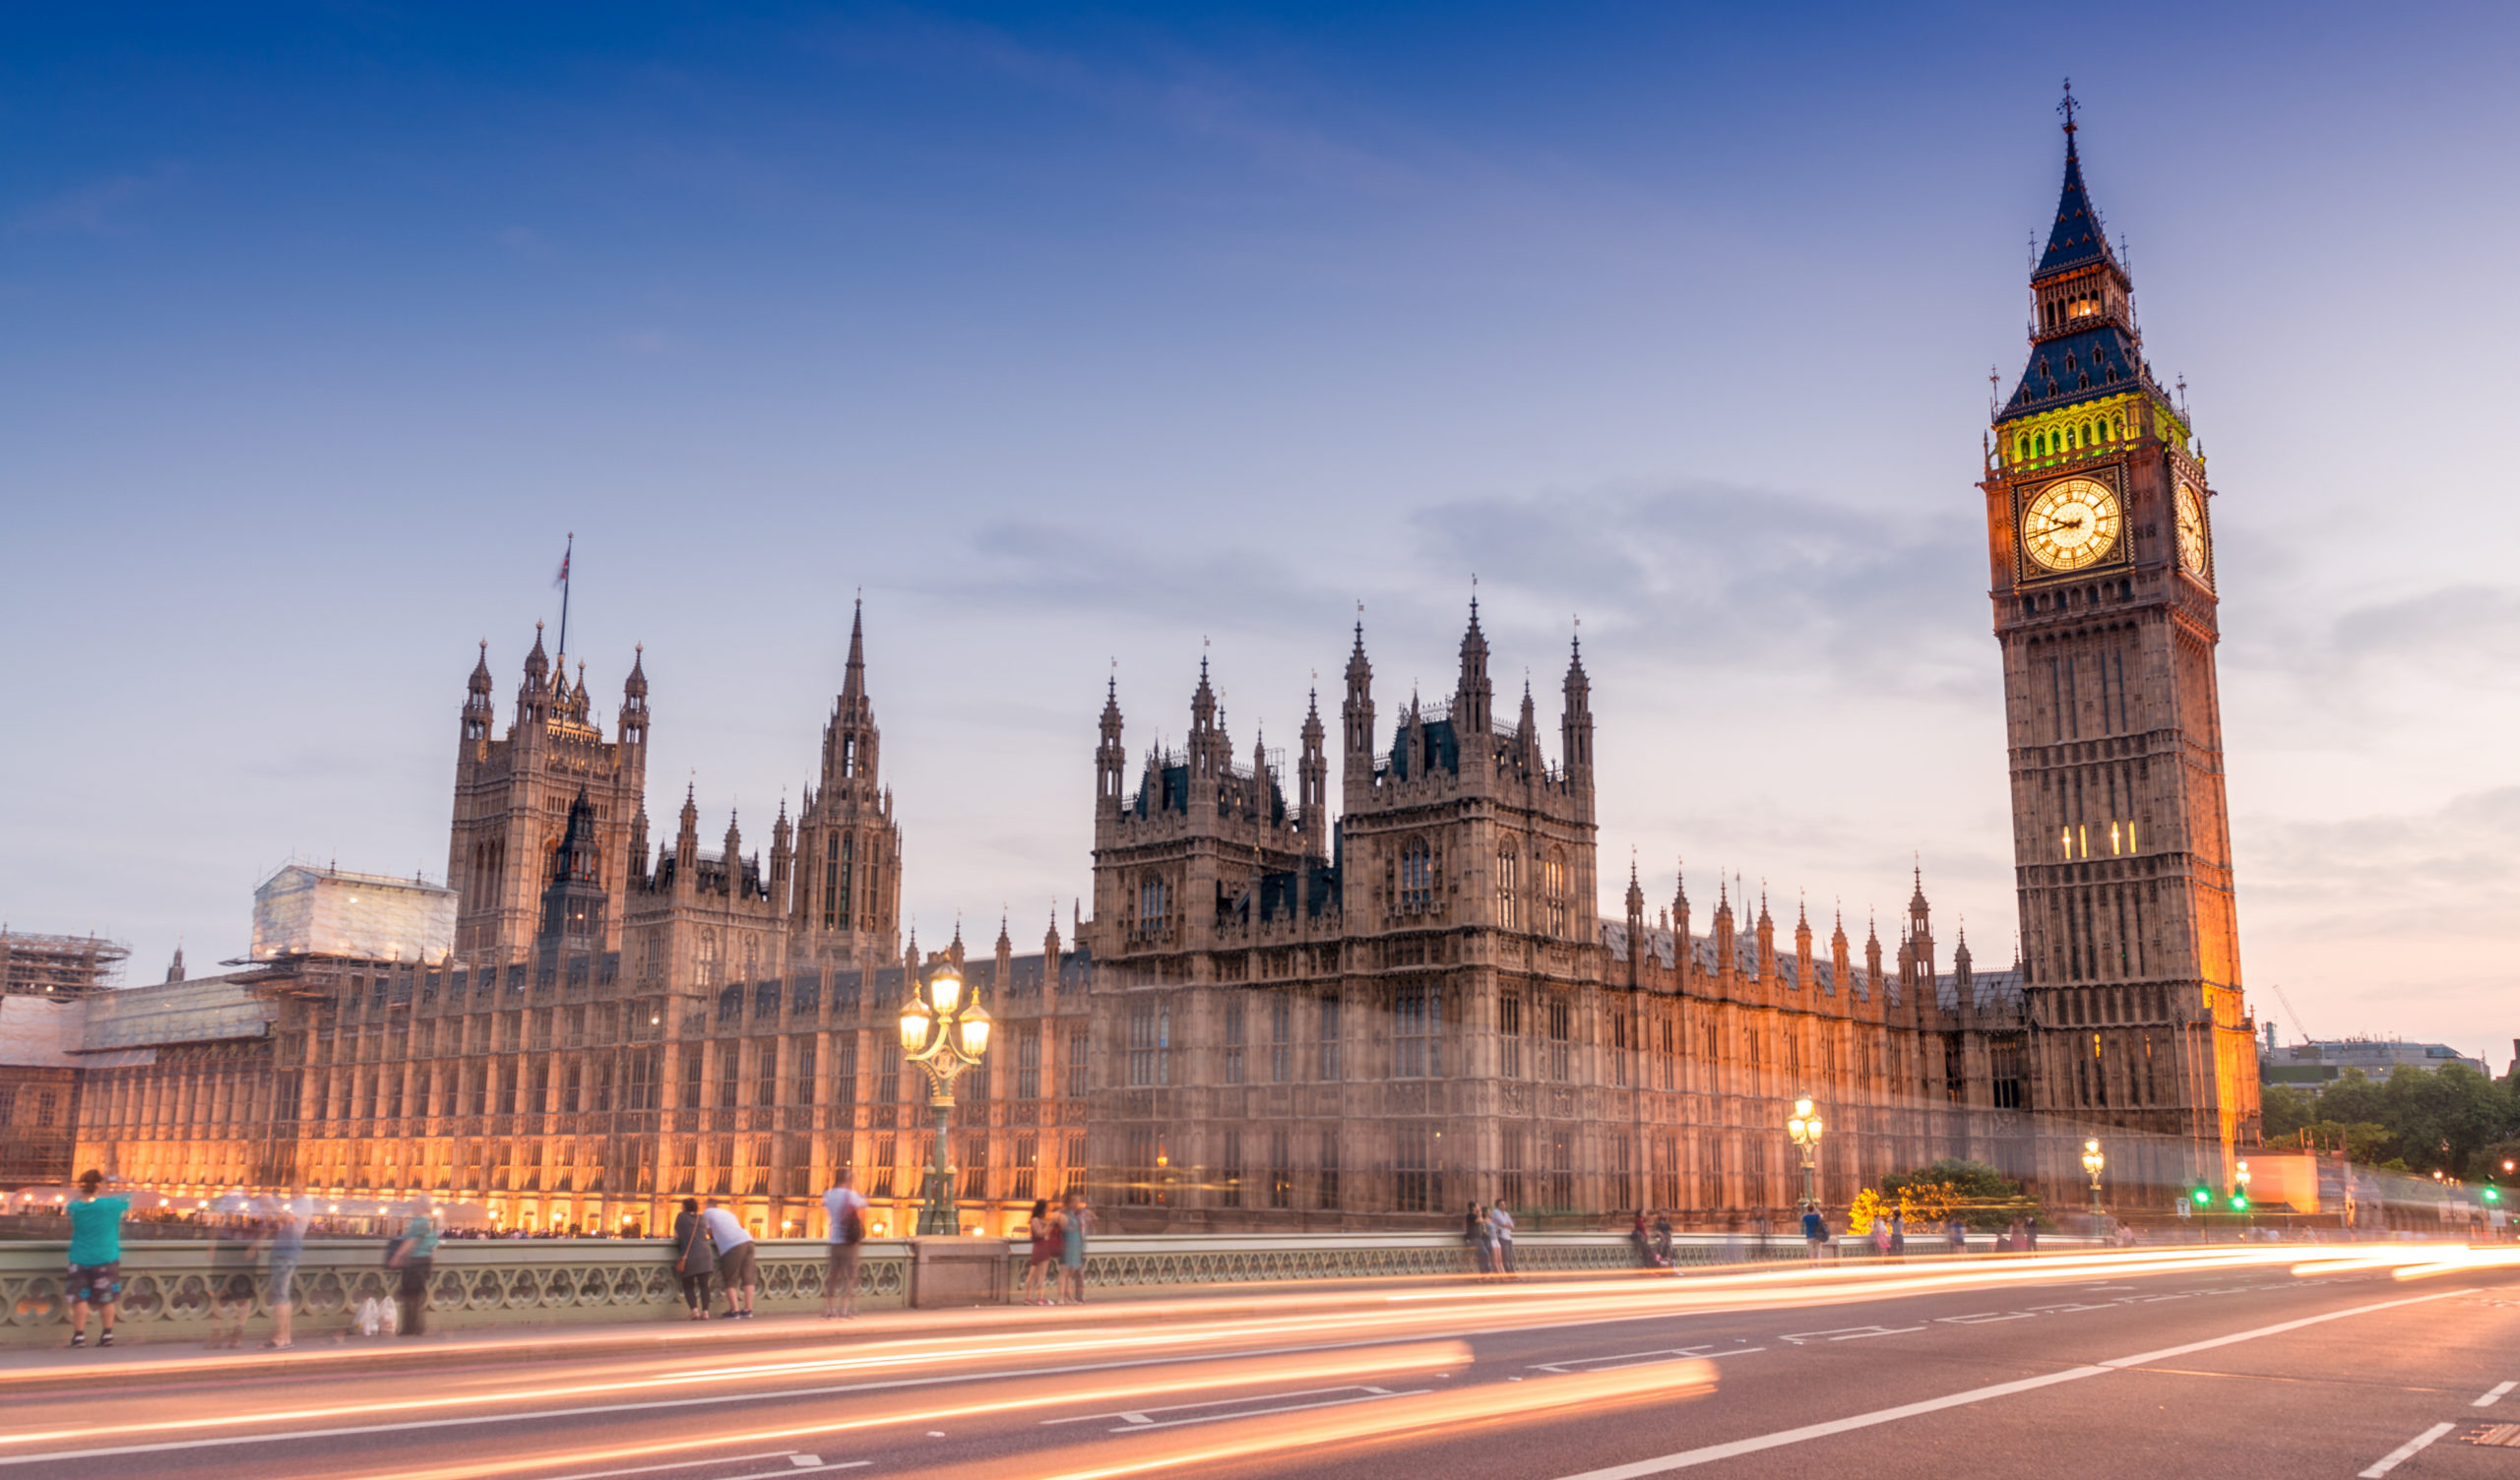 Partner from gunnercooke joins ‘Menopause Mandate’ event at Houses of Parliament